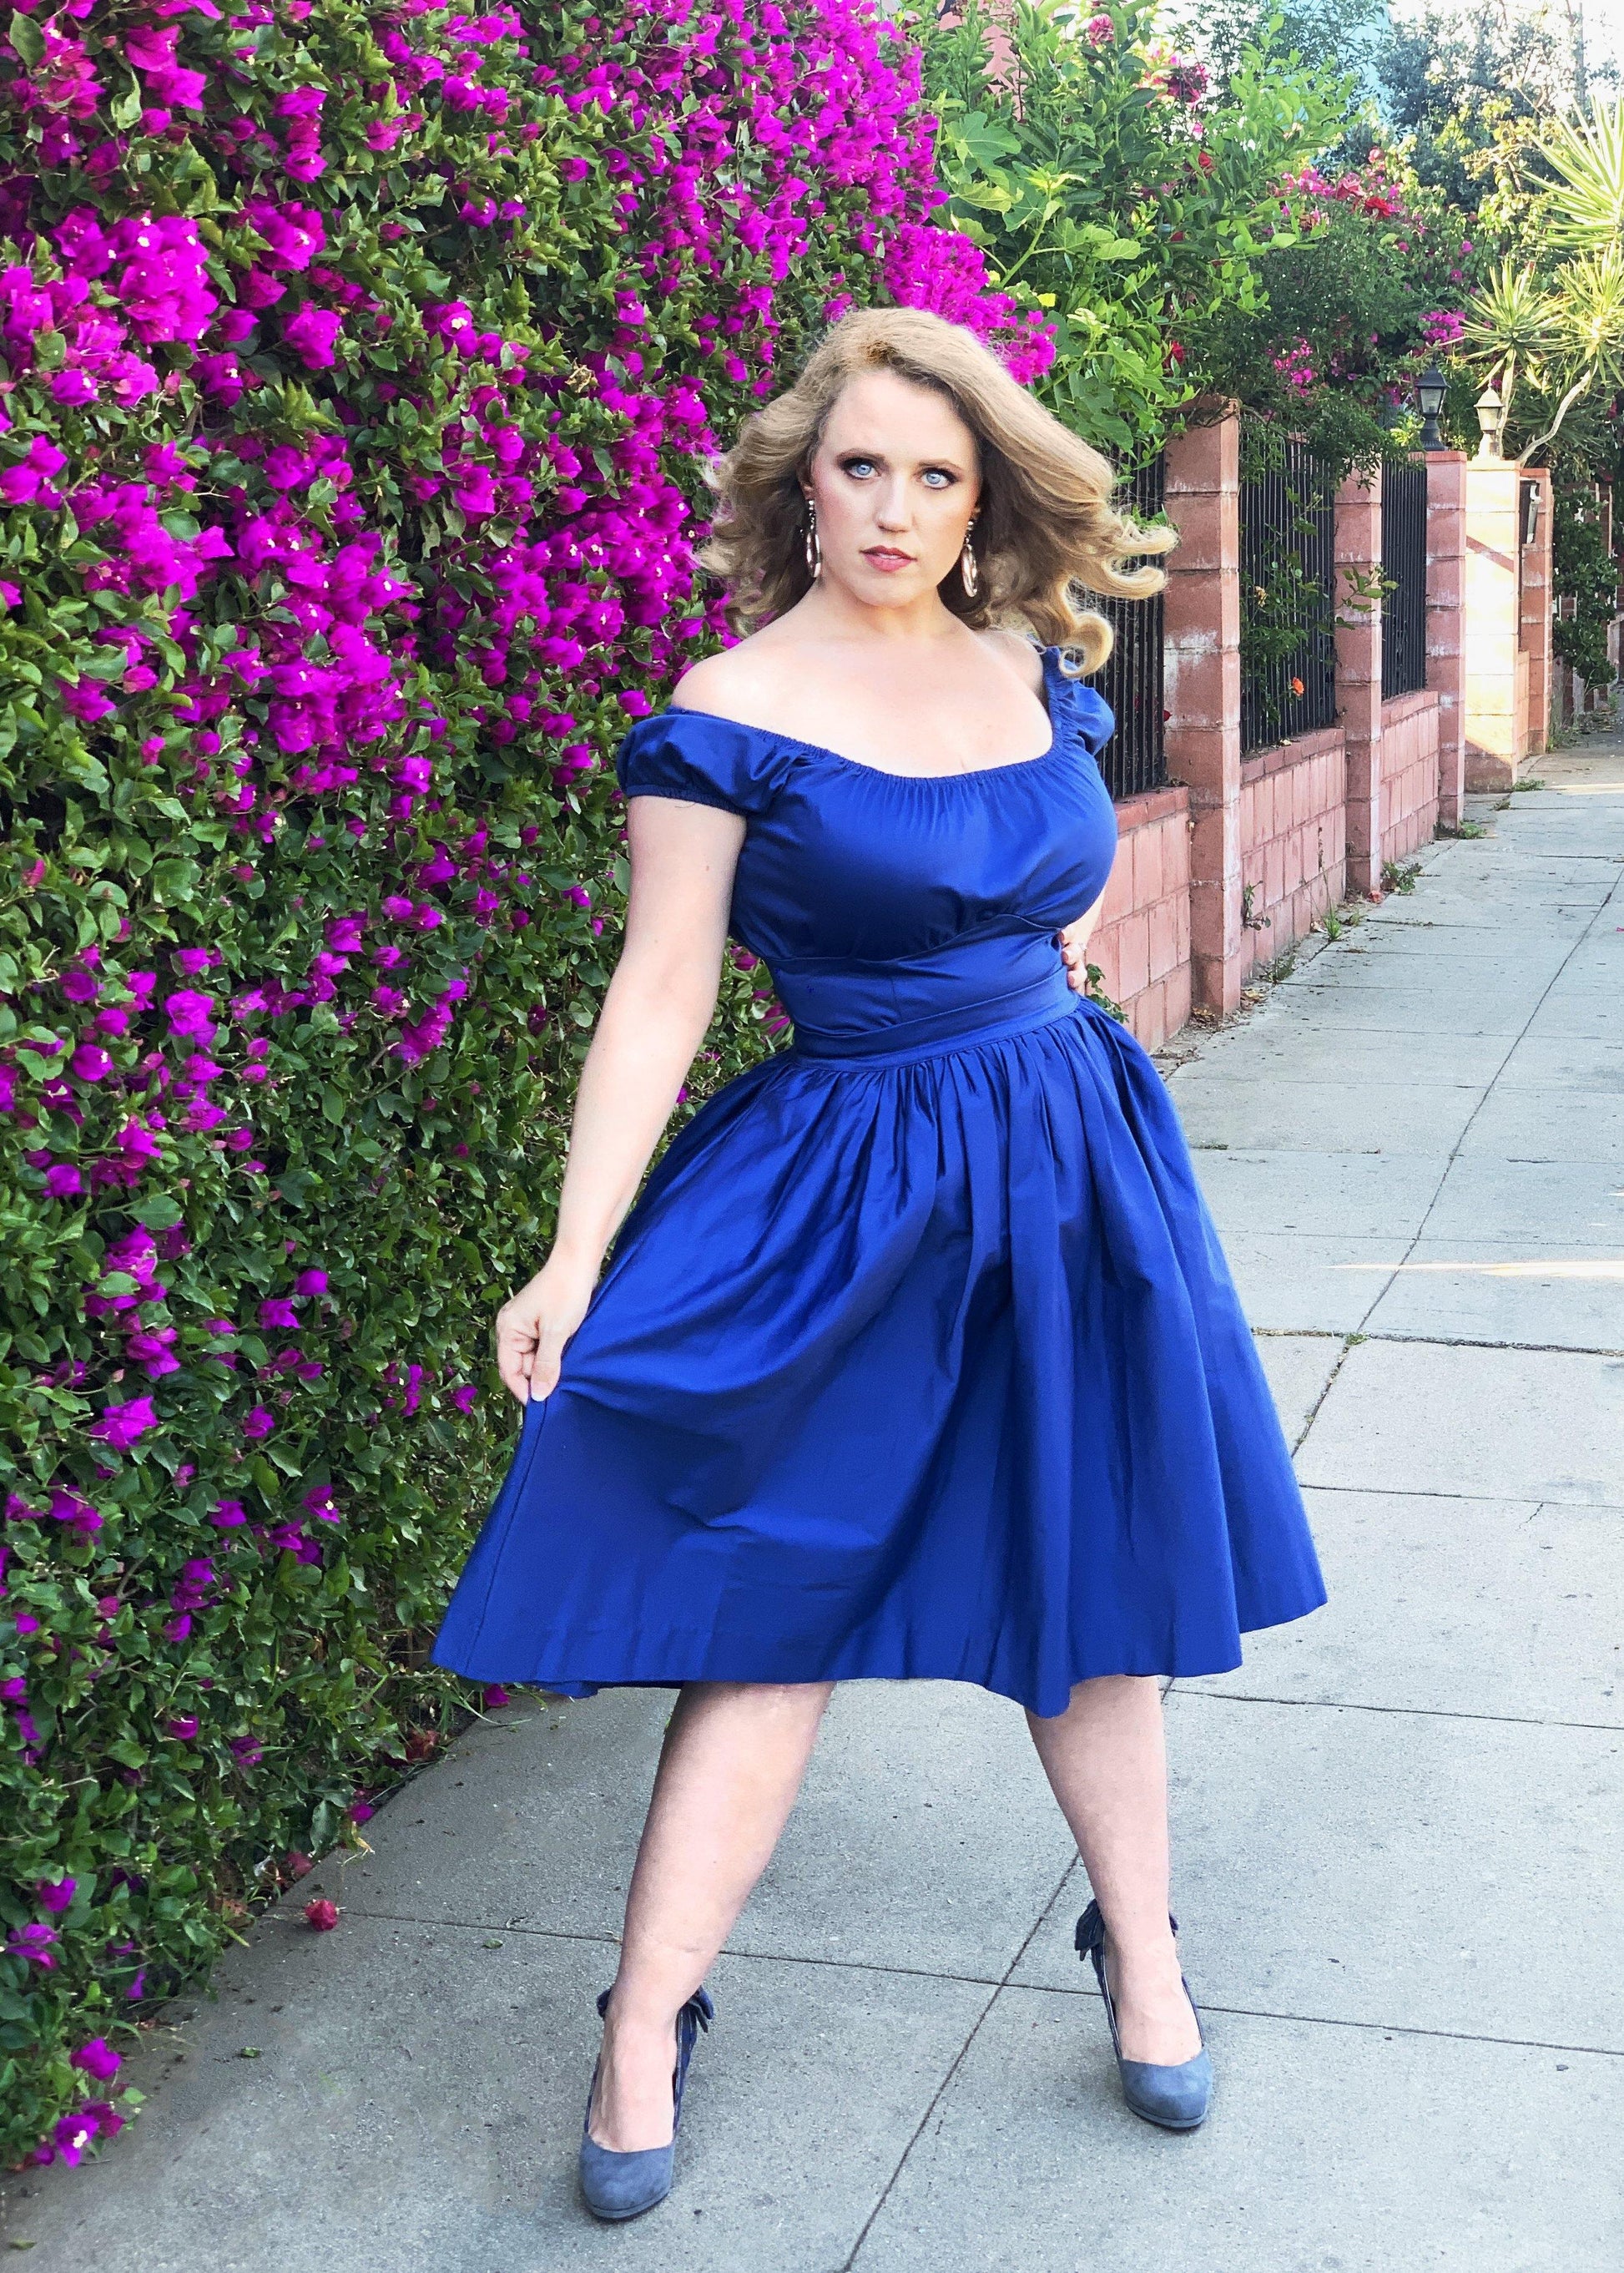 Bella Vintage Gathered Swing Skirt with Pockets in Solid Royal Blue Sateen | Pinup Couture - pinupgirlclothing.com